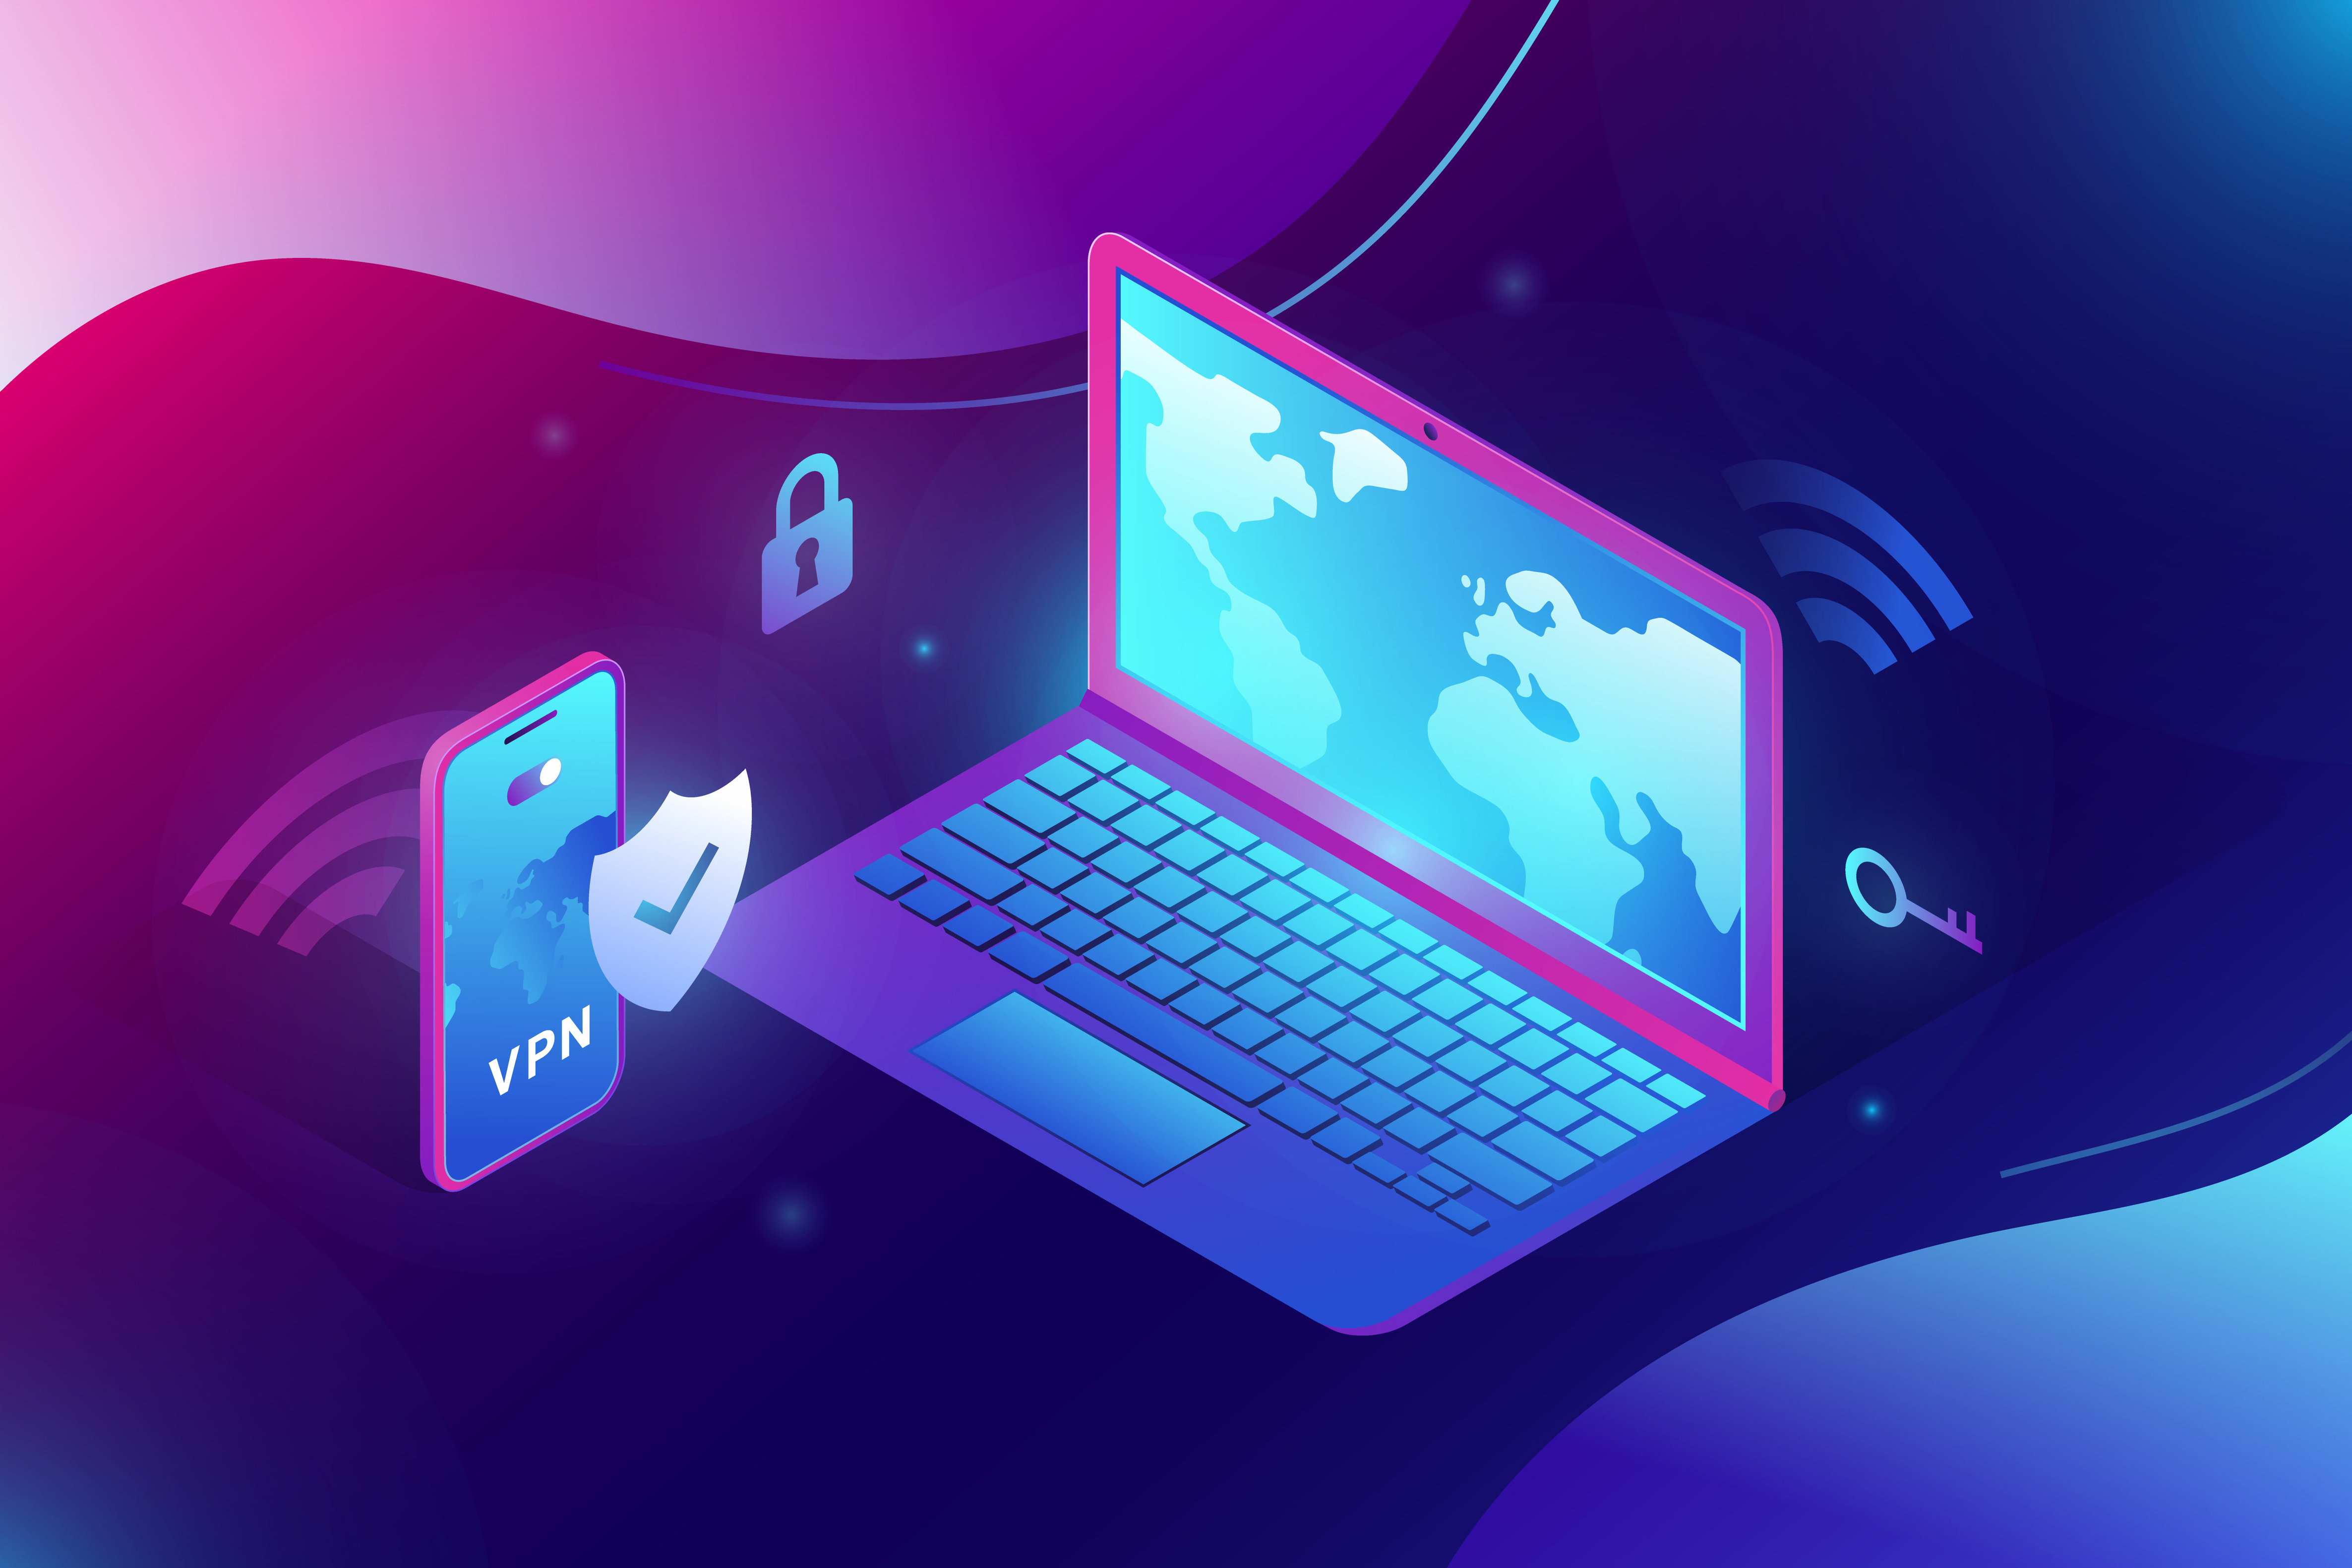 Featured image: Devices on a corporate VPN network  - Read full post: Why Your Business Needs a VPN for Optimal Security and Flexibility